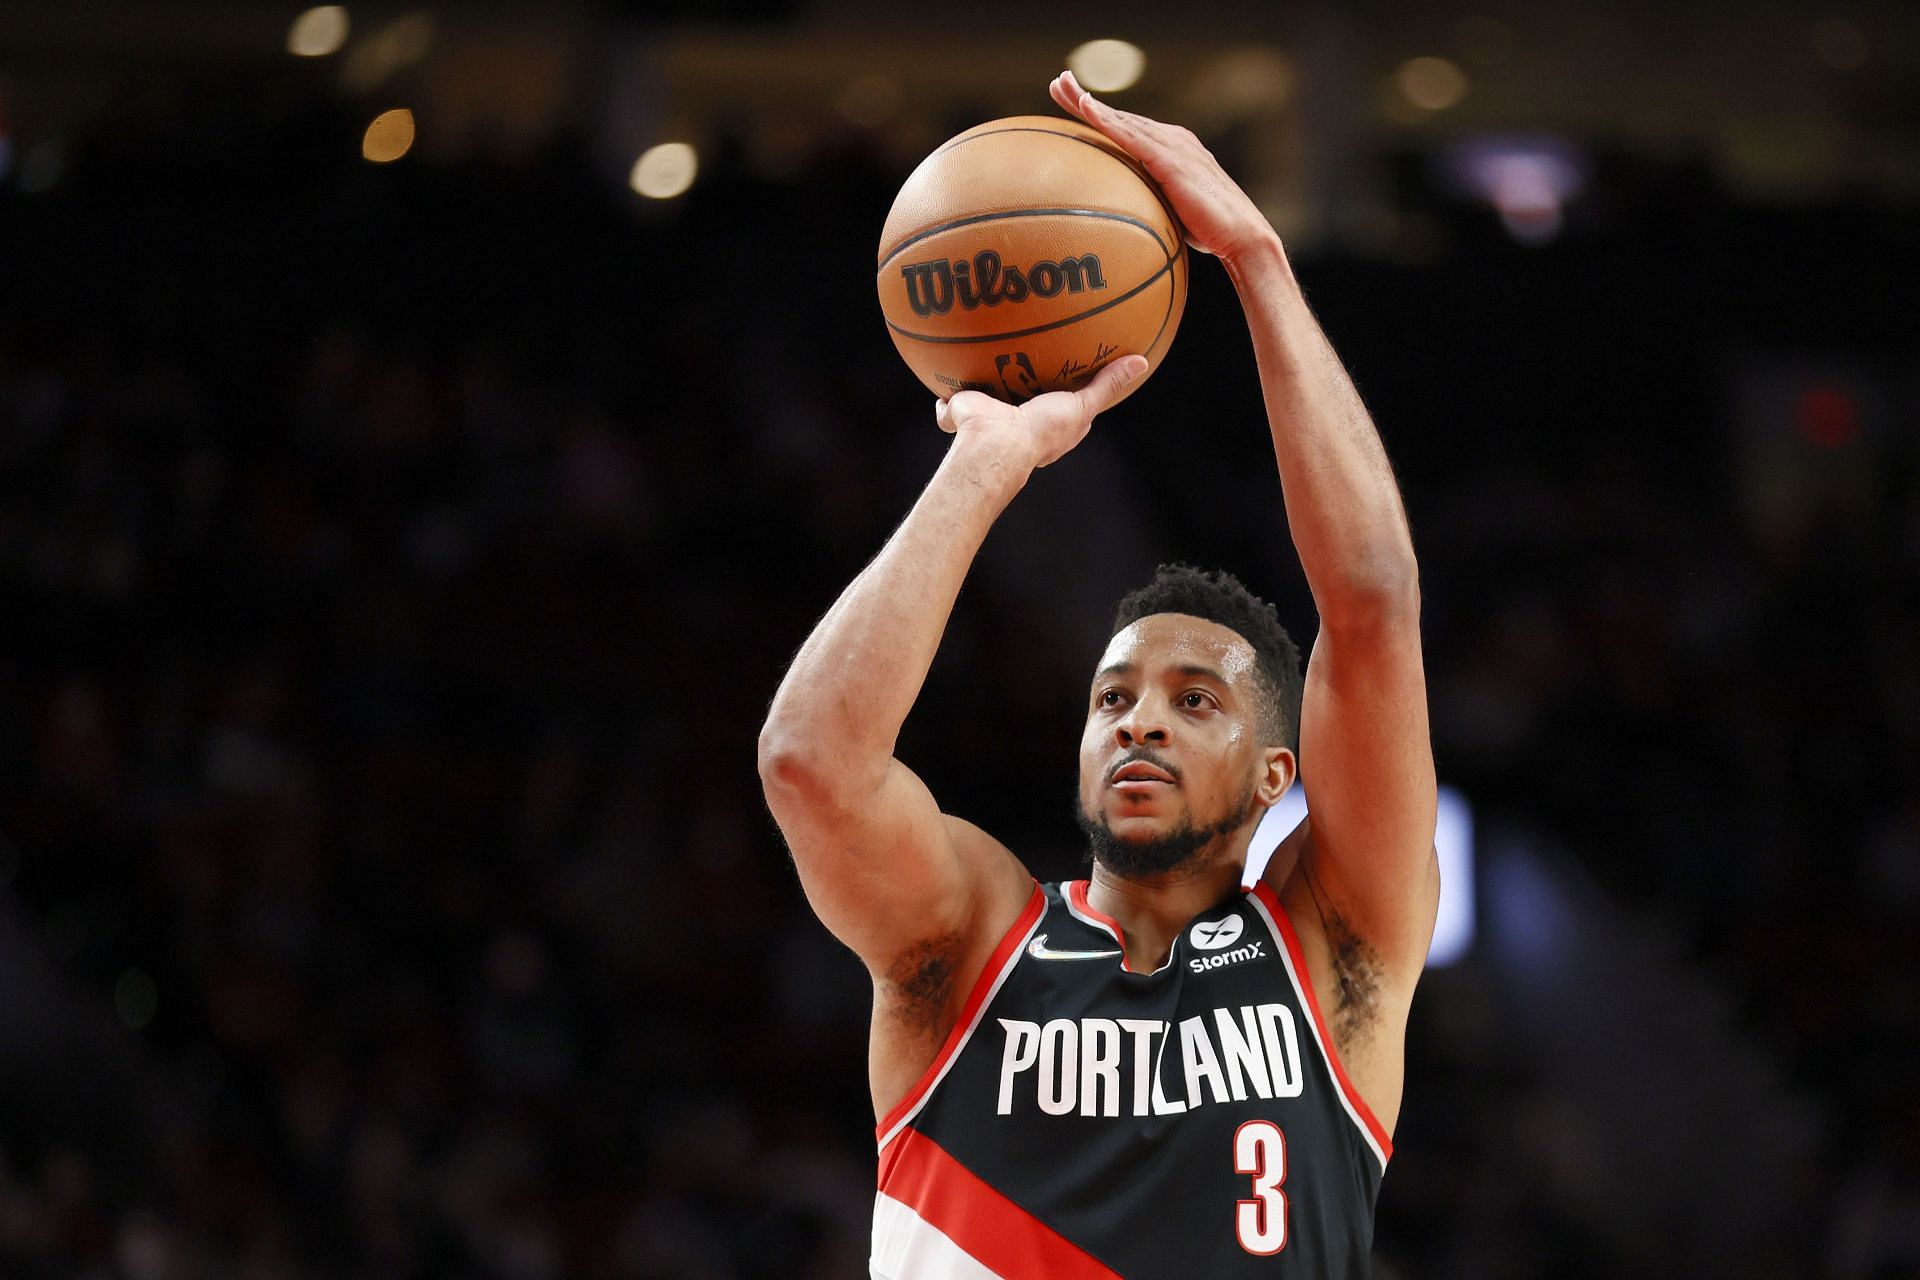 PORTLAND, OREGON - JANUARY 25: CJ McCollum #3 of the Portland Trail Blazers attempts a free throw against the Minnesota Timberwolves during the first half at Moda Center on January 25, 2022 in Portland, Oregon.